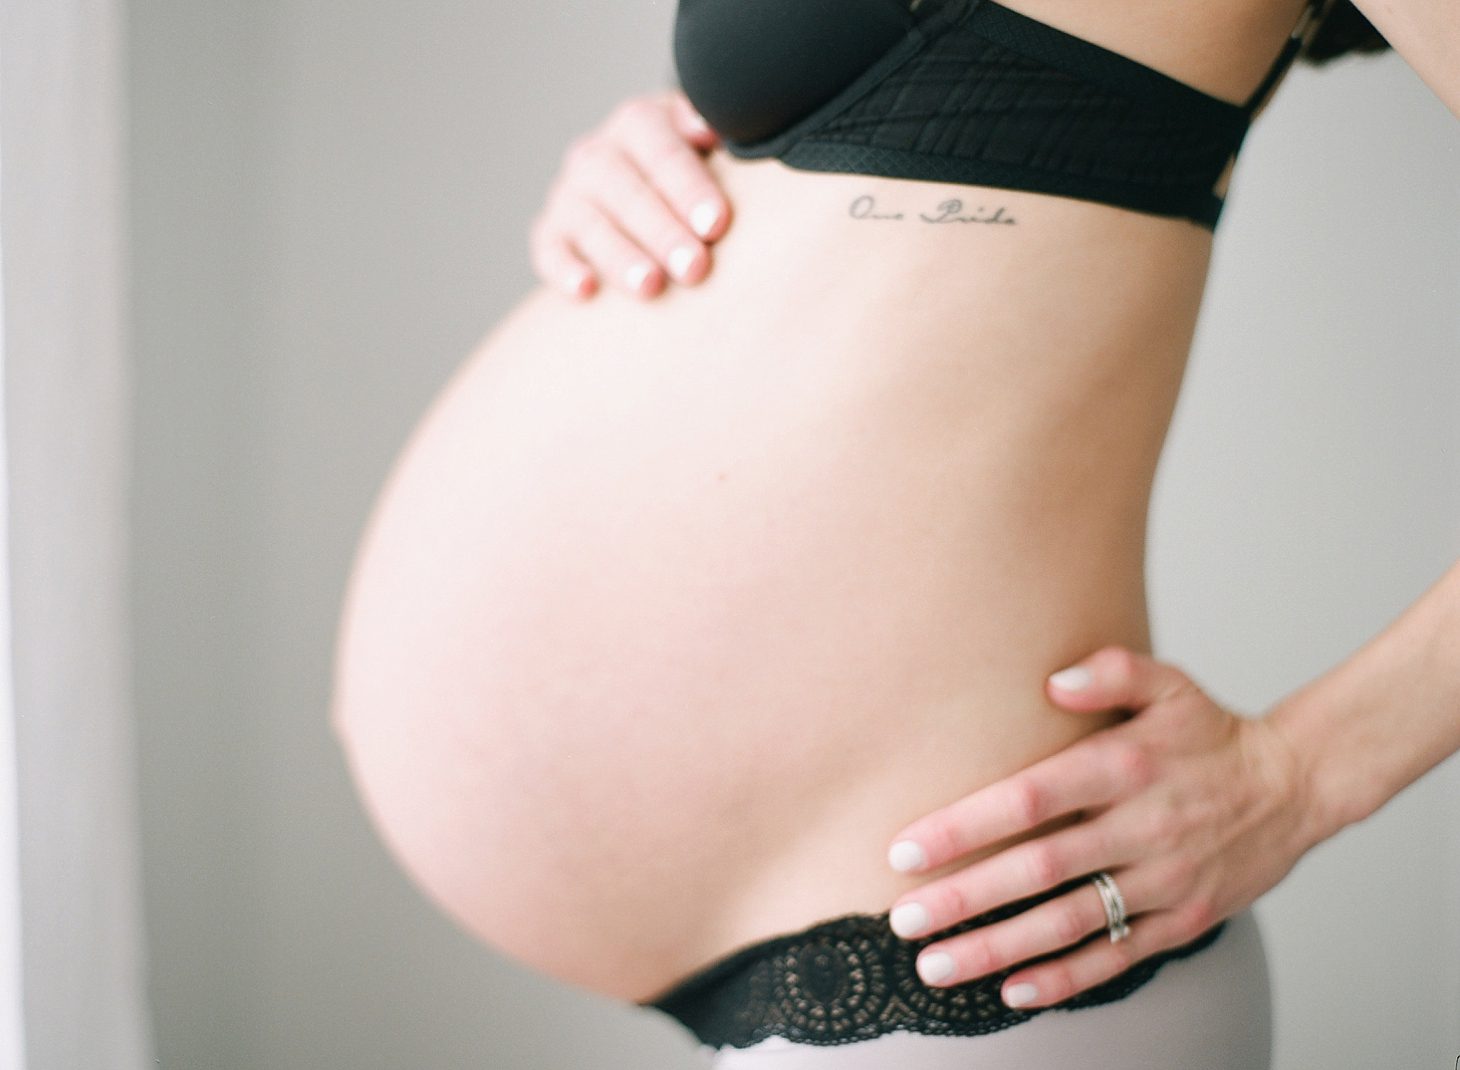 View More: http://brittamariephotography.pass.us/christy-maternity